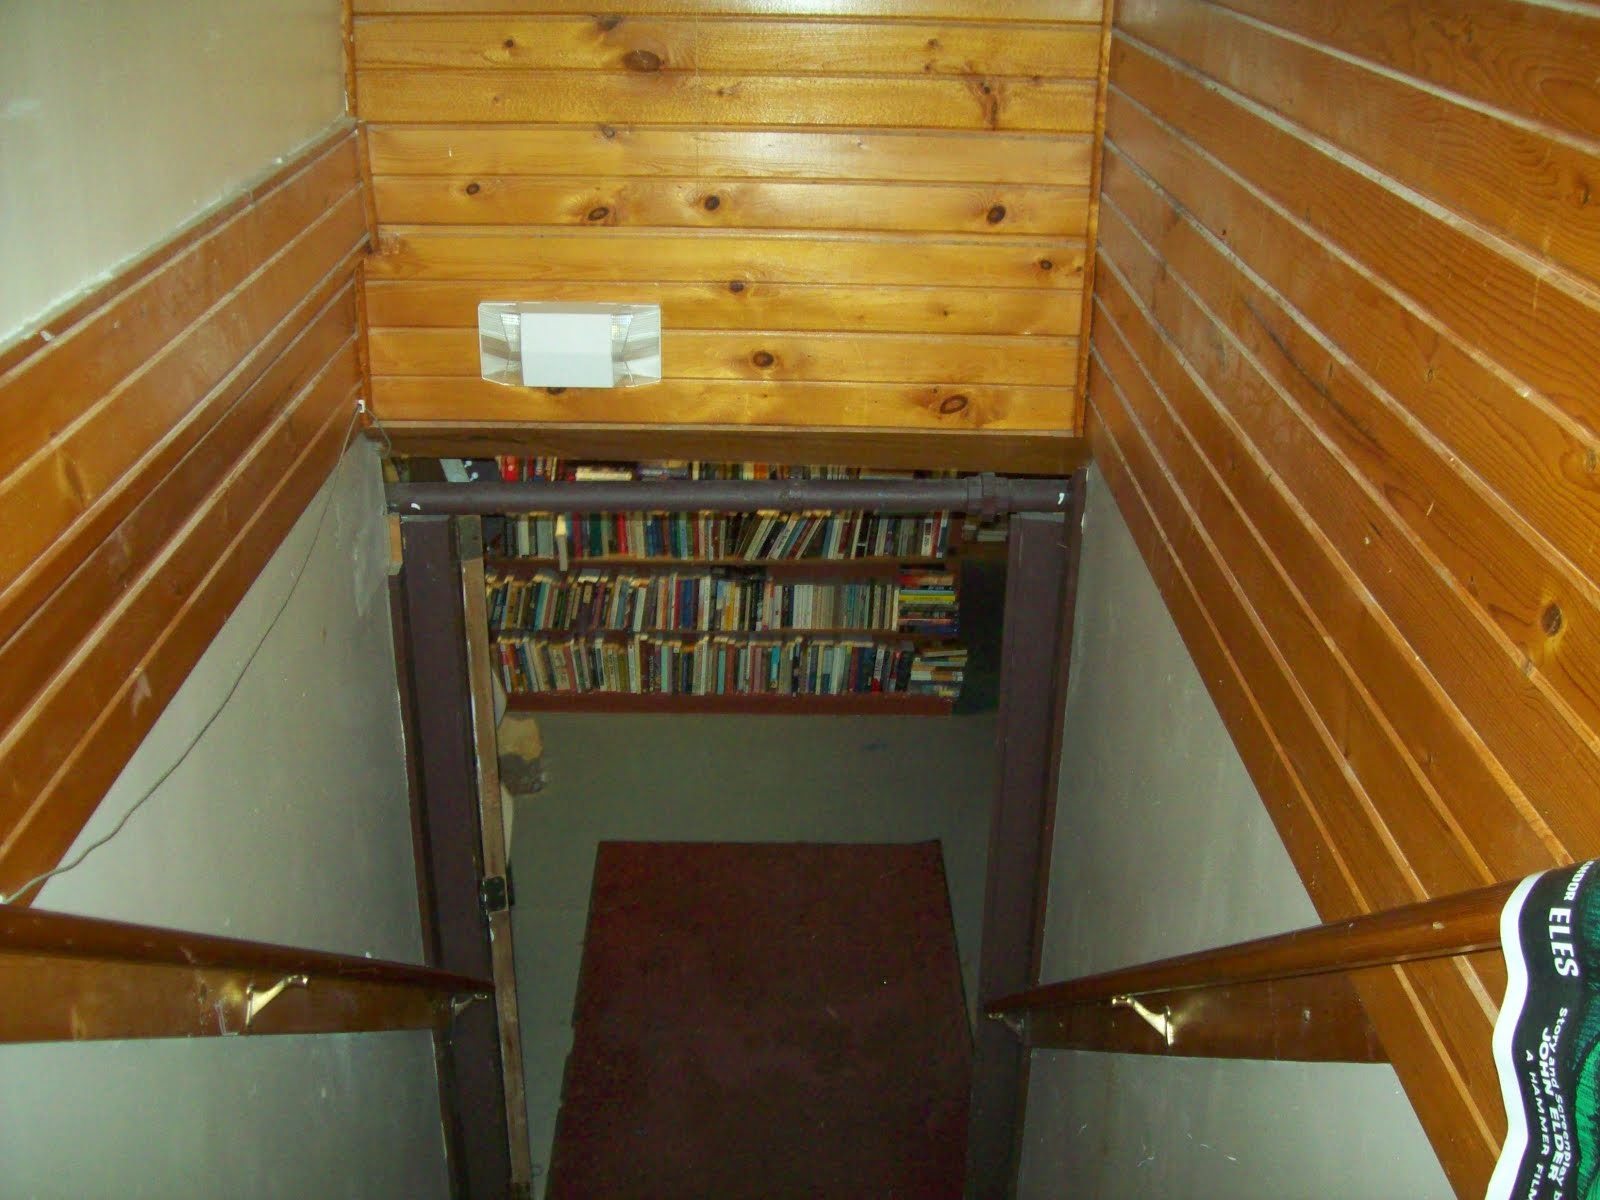 Downstairs